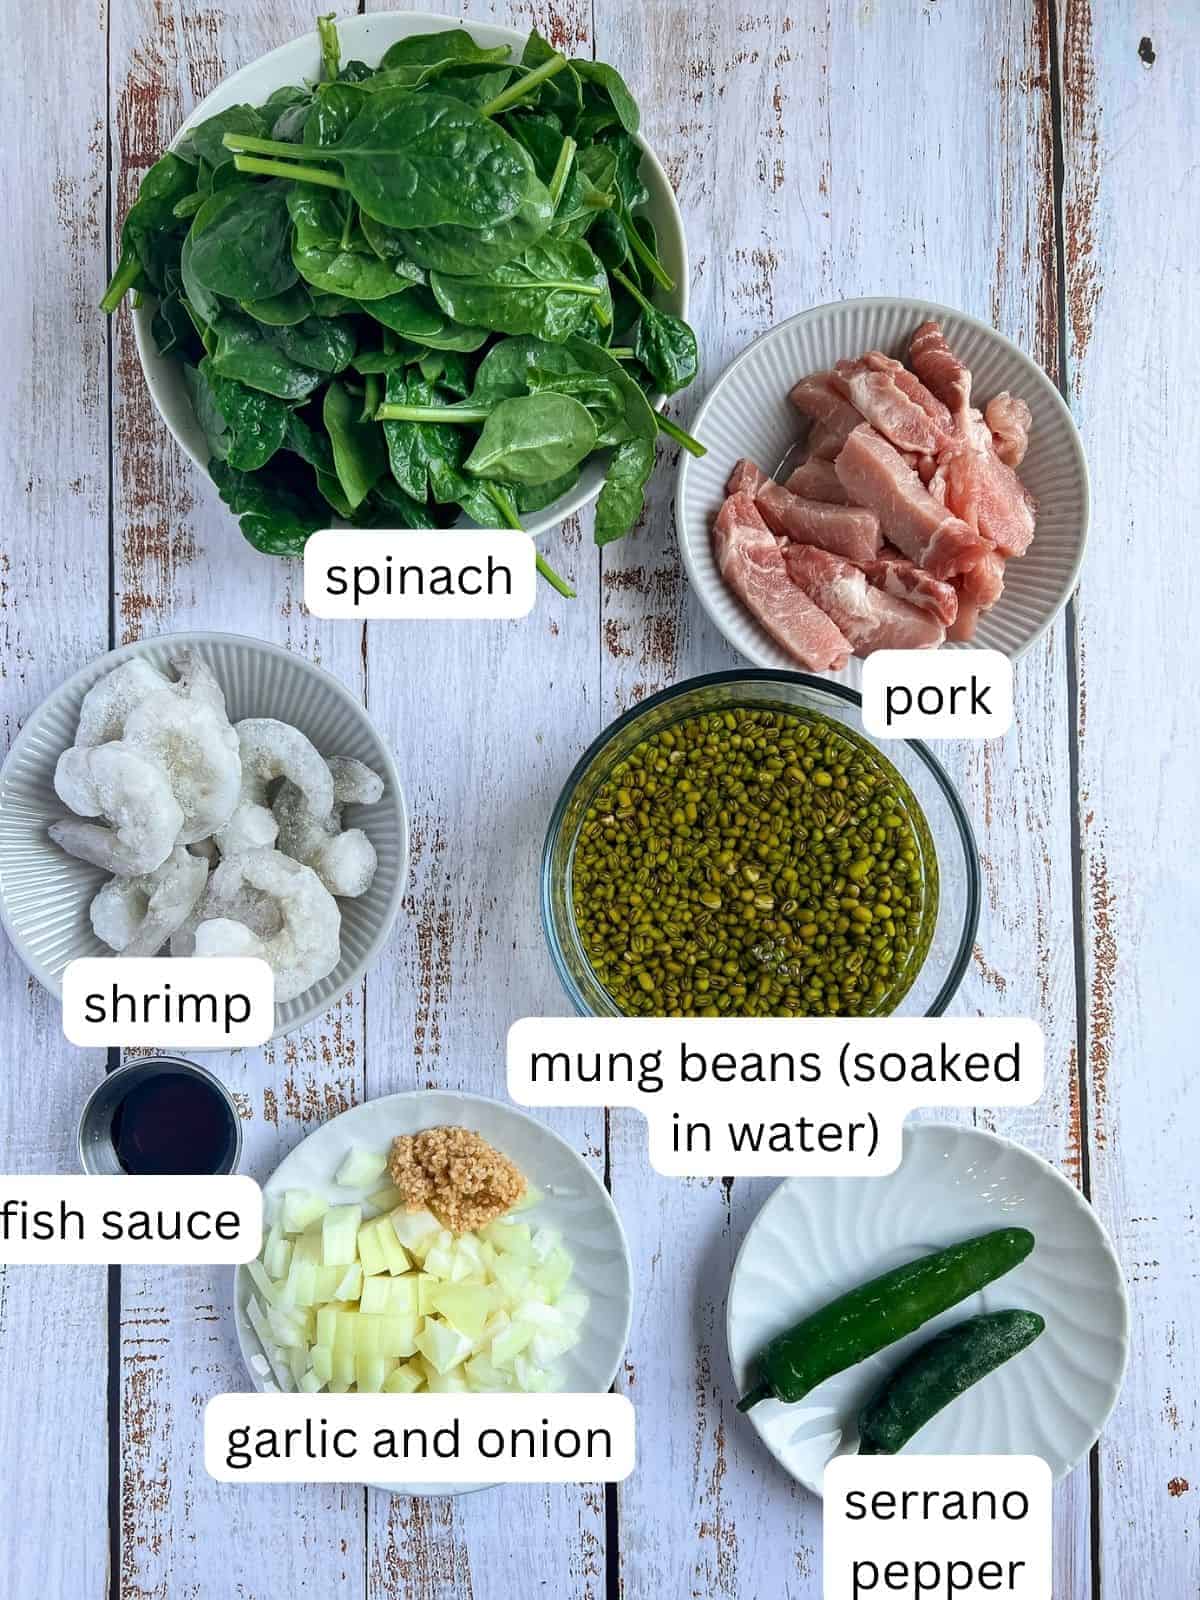 Ingredients for mung bean soup.